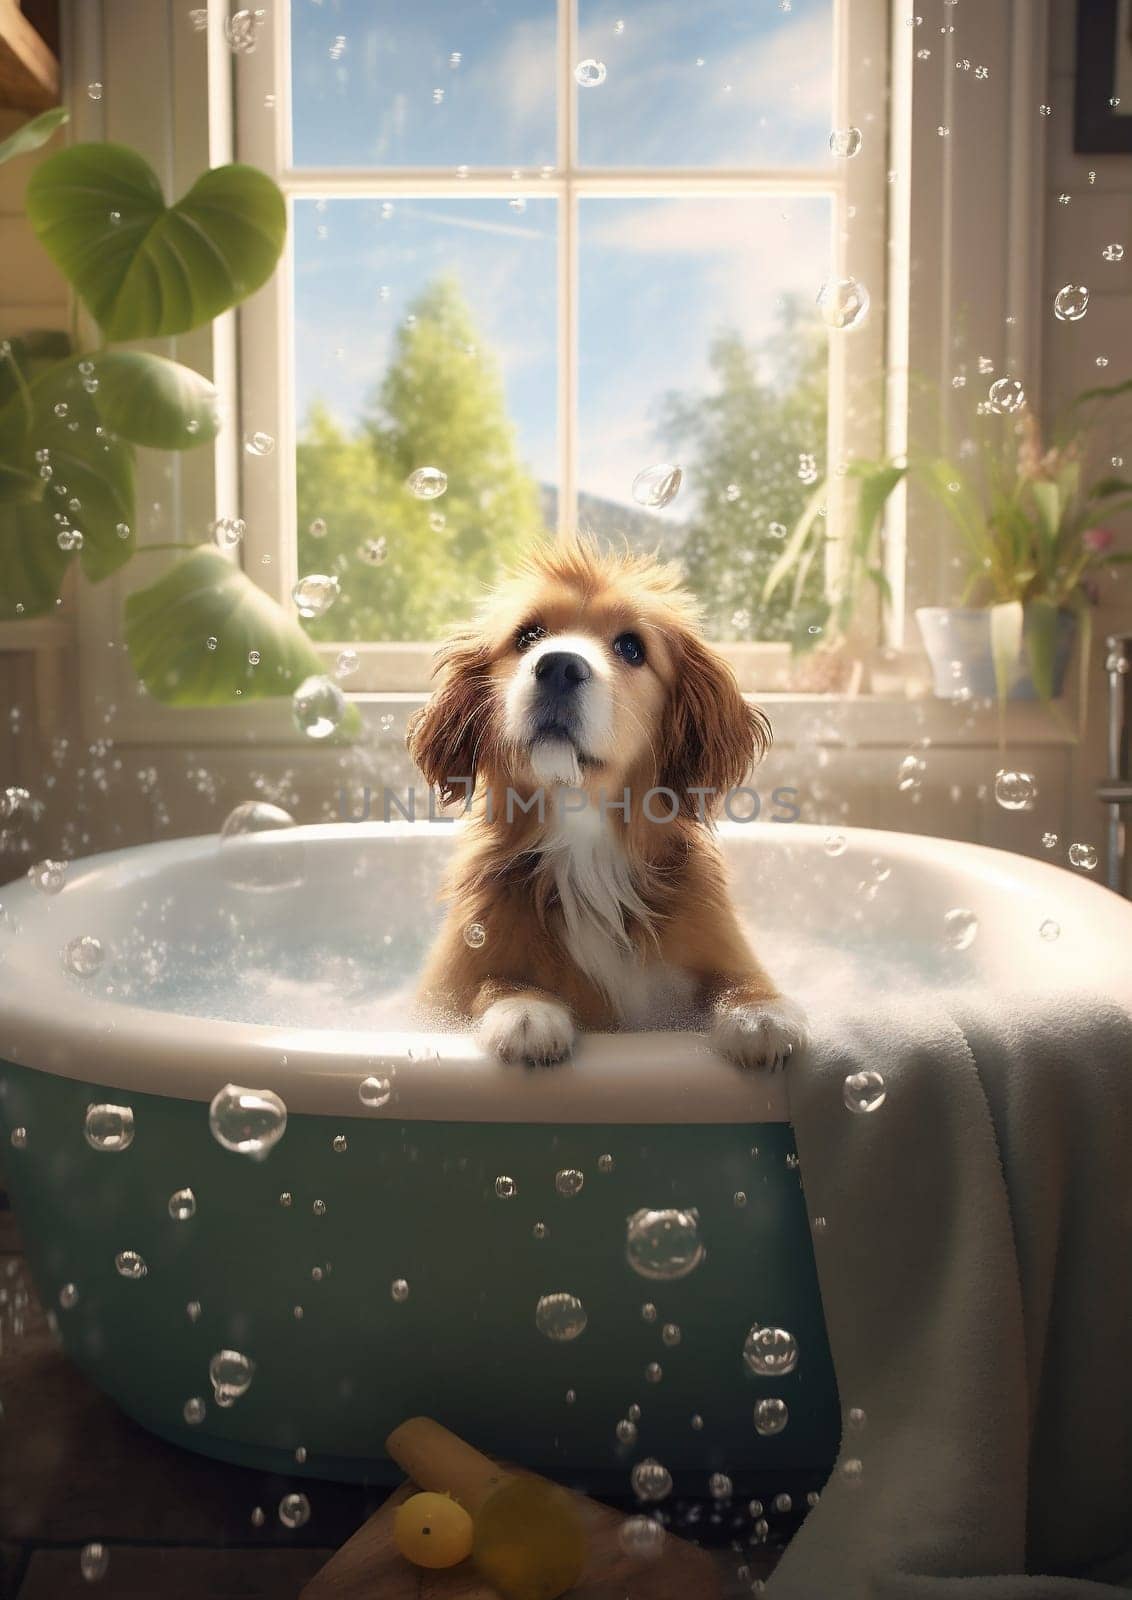 Pet dog bathing wet wash water animal clean puppy bathroom cute shower care funny shampoo hygiene white soap grooming